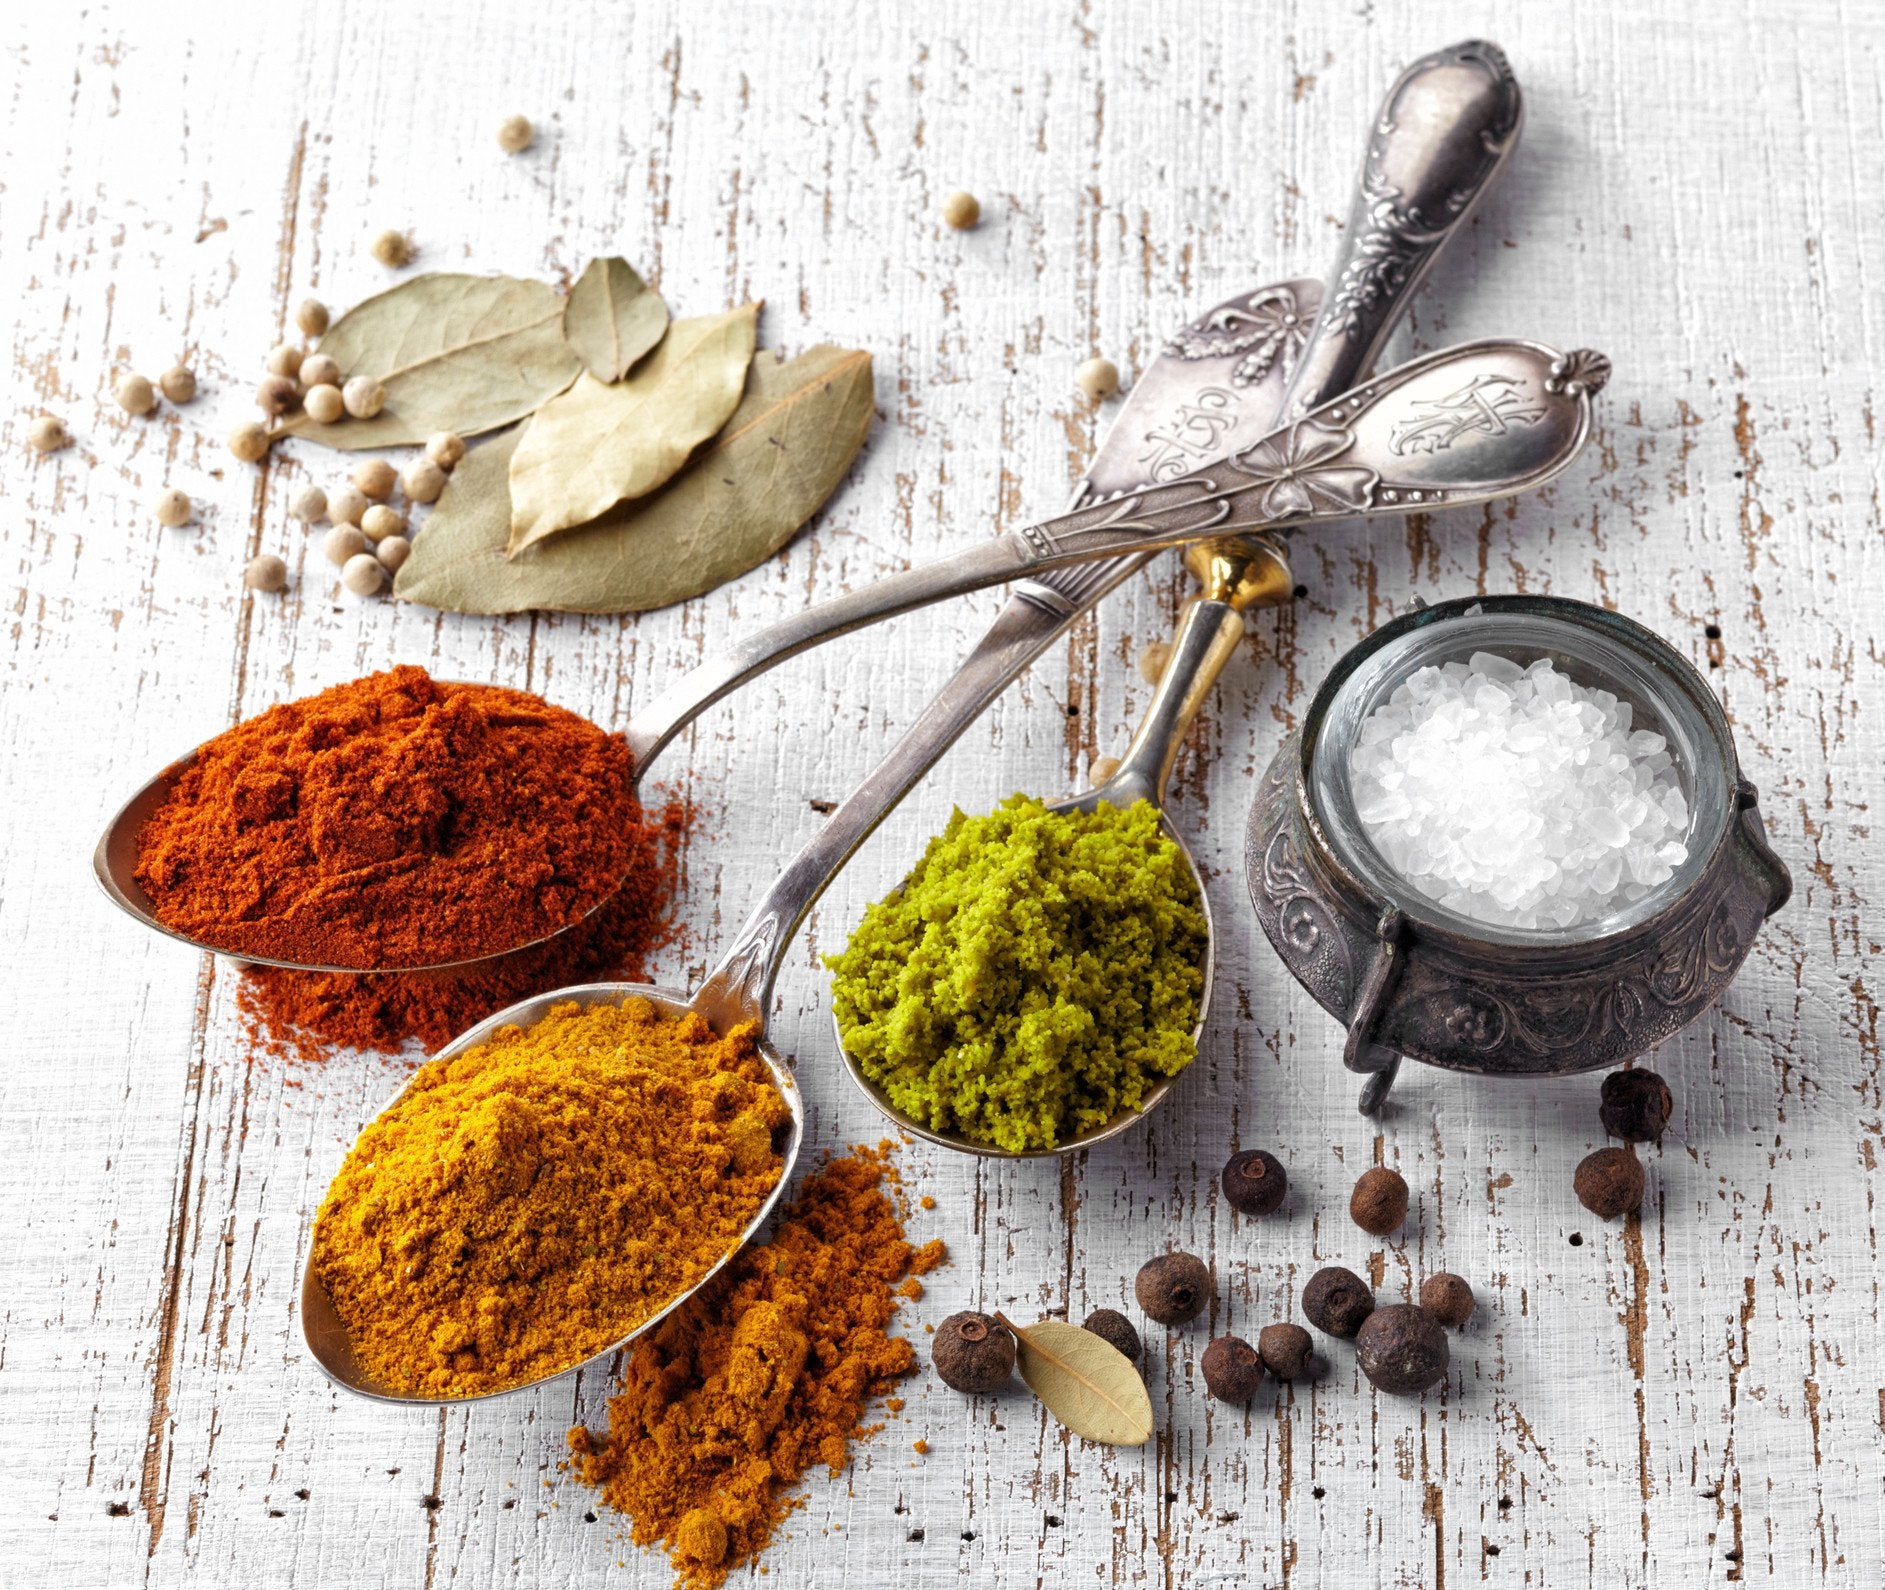 5 Spices That Enhance Your Food and Make You Healthier